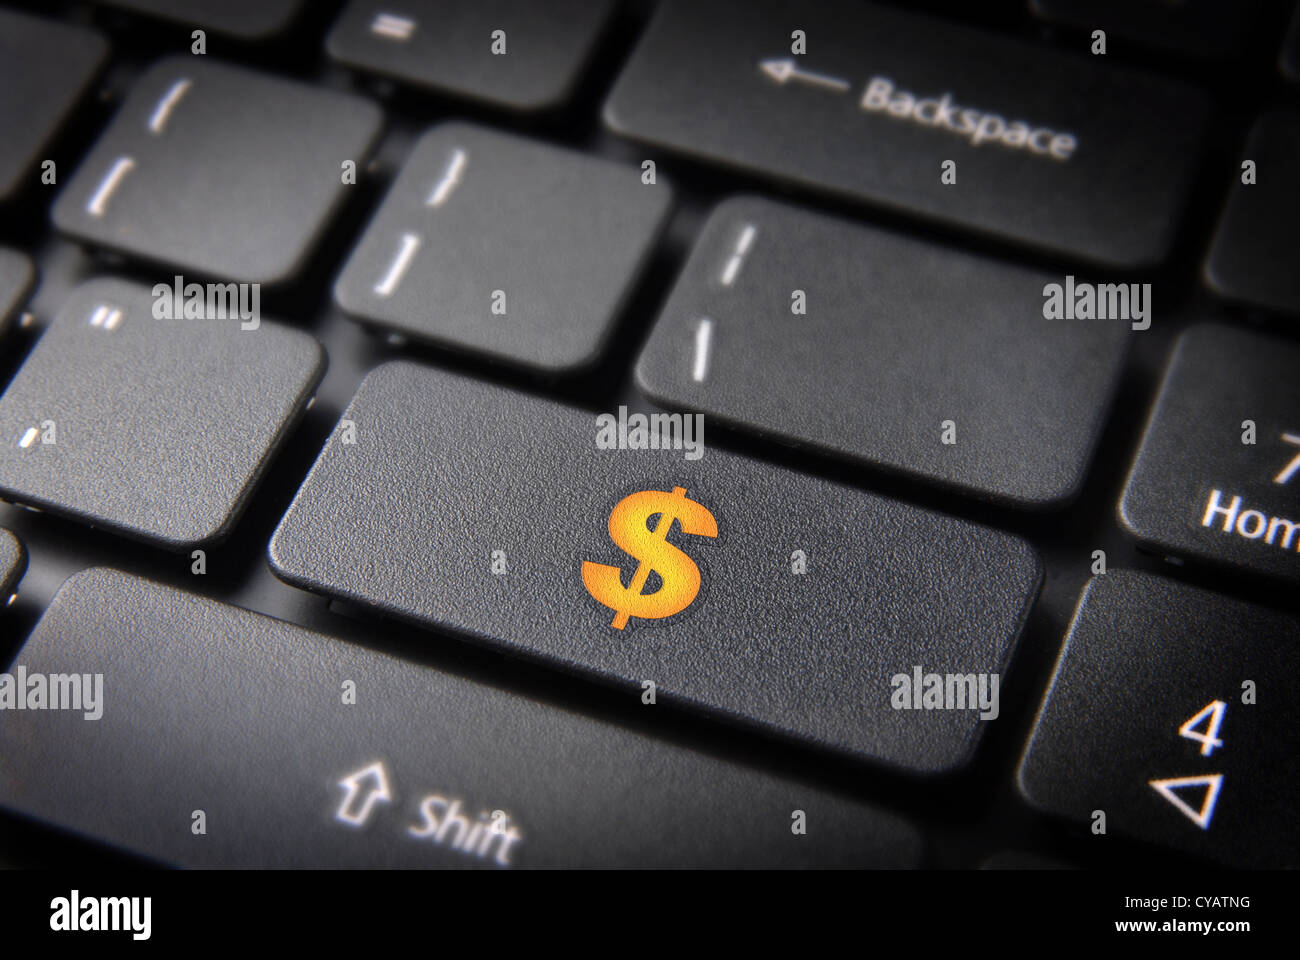 Make money with internet: yellow dollar currency symbol on laptop keyboard. Included clipping path, so you can easily edit it. Stock Photo